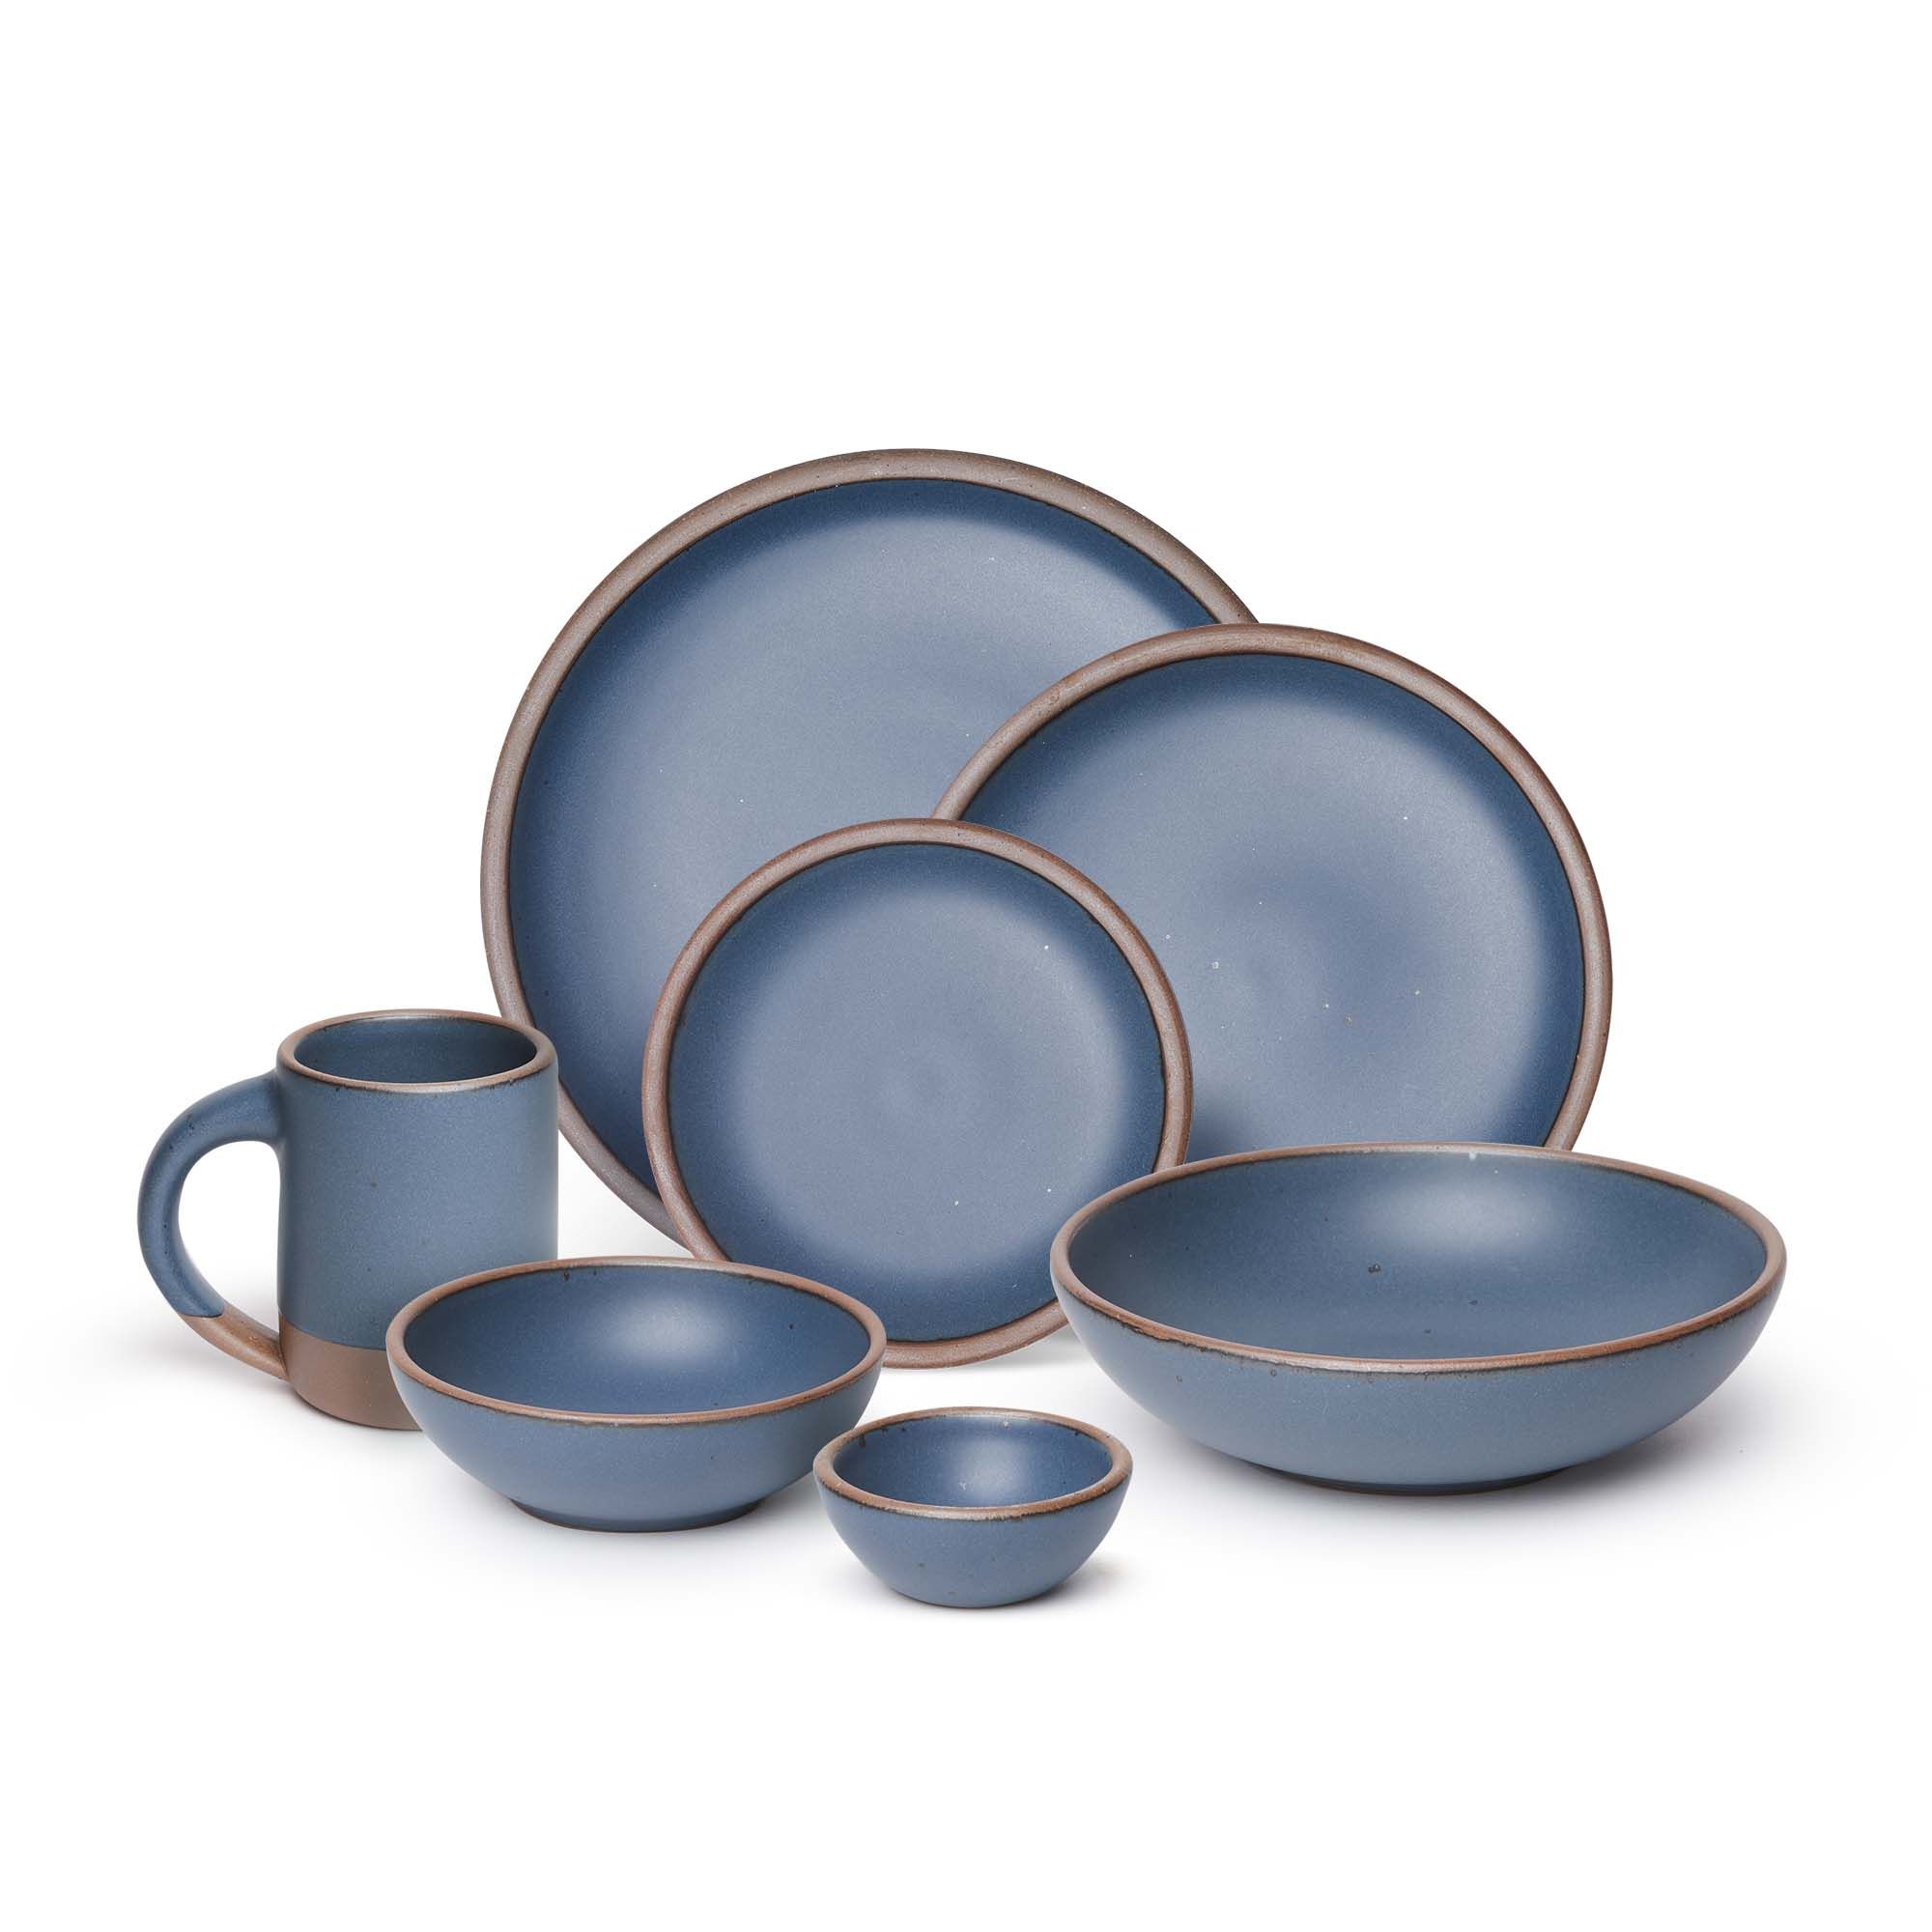 The Mug, bitty bowl, breakfast bowl, everyday bowl, cake plate, side plate and dinner plate paired together in a toned-down navy color featuring iron speckles